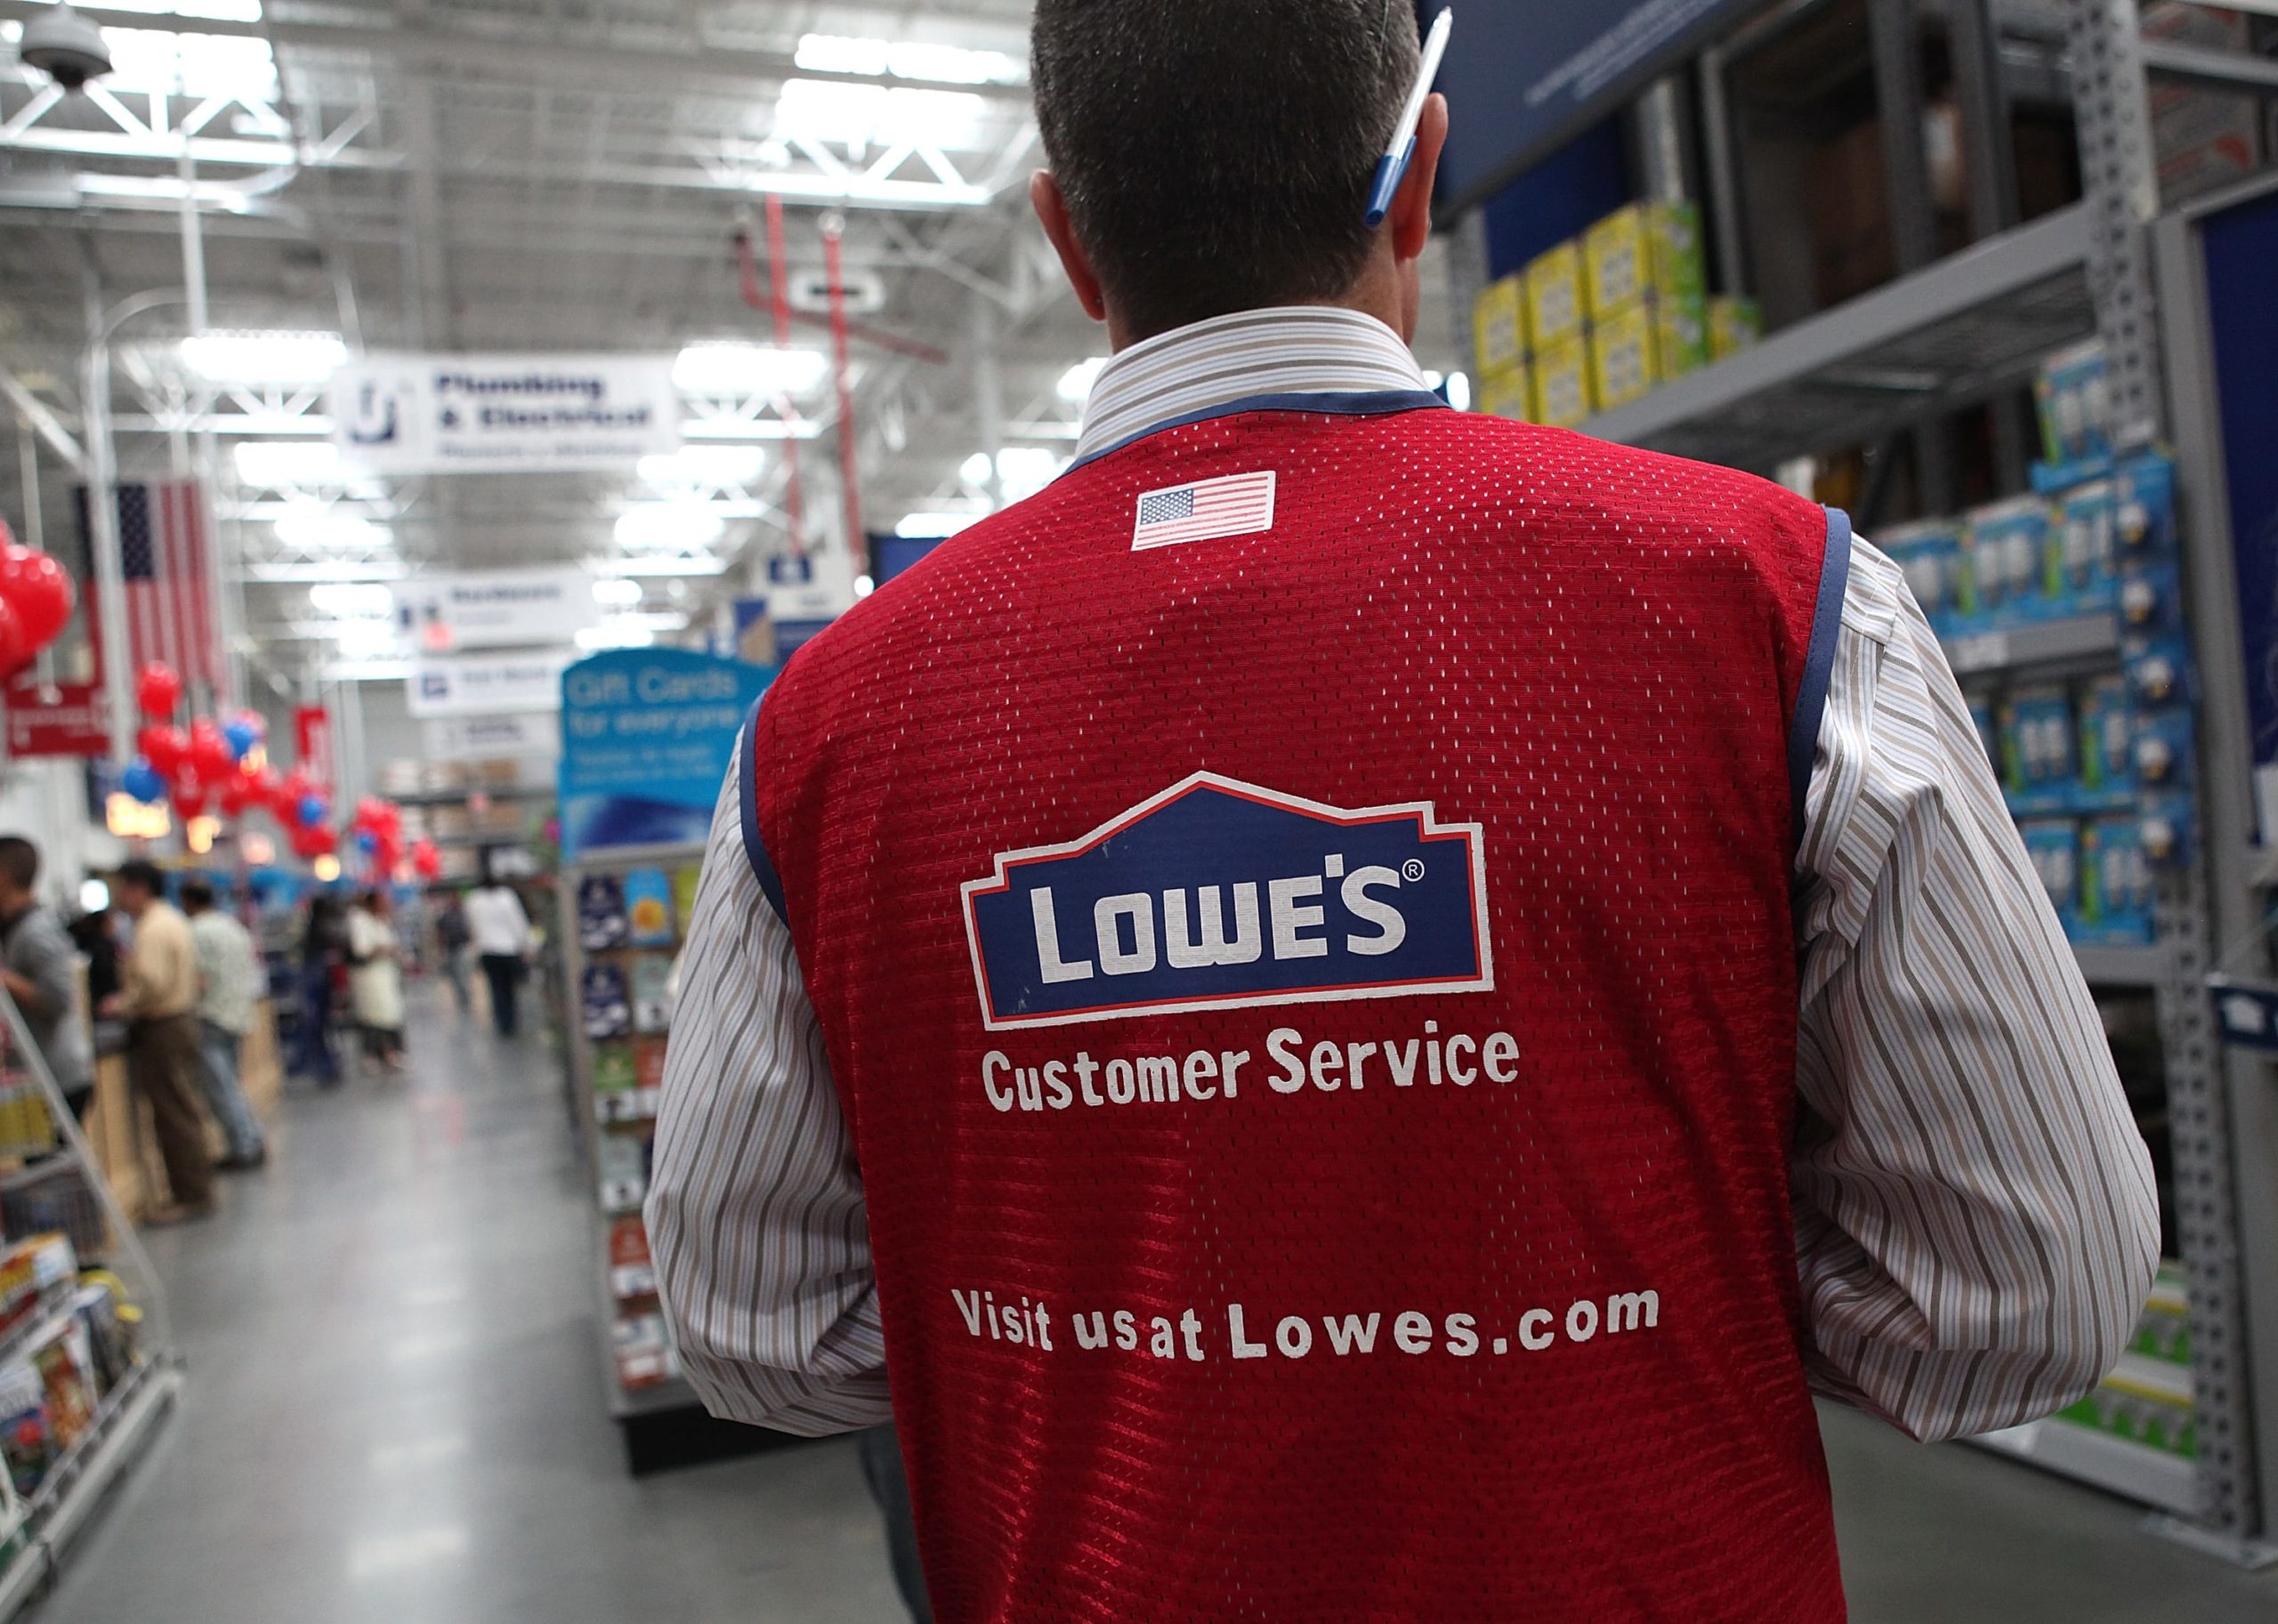 Lowe’s is seeking to rent 53,000 individuals for spring 2020